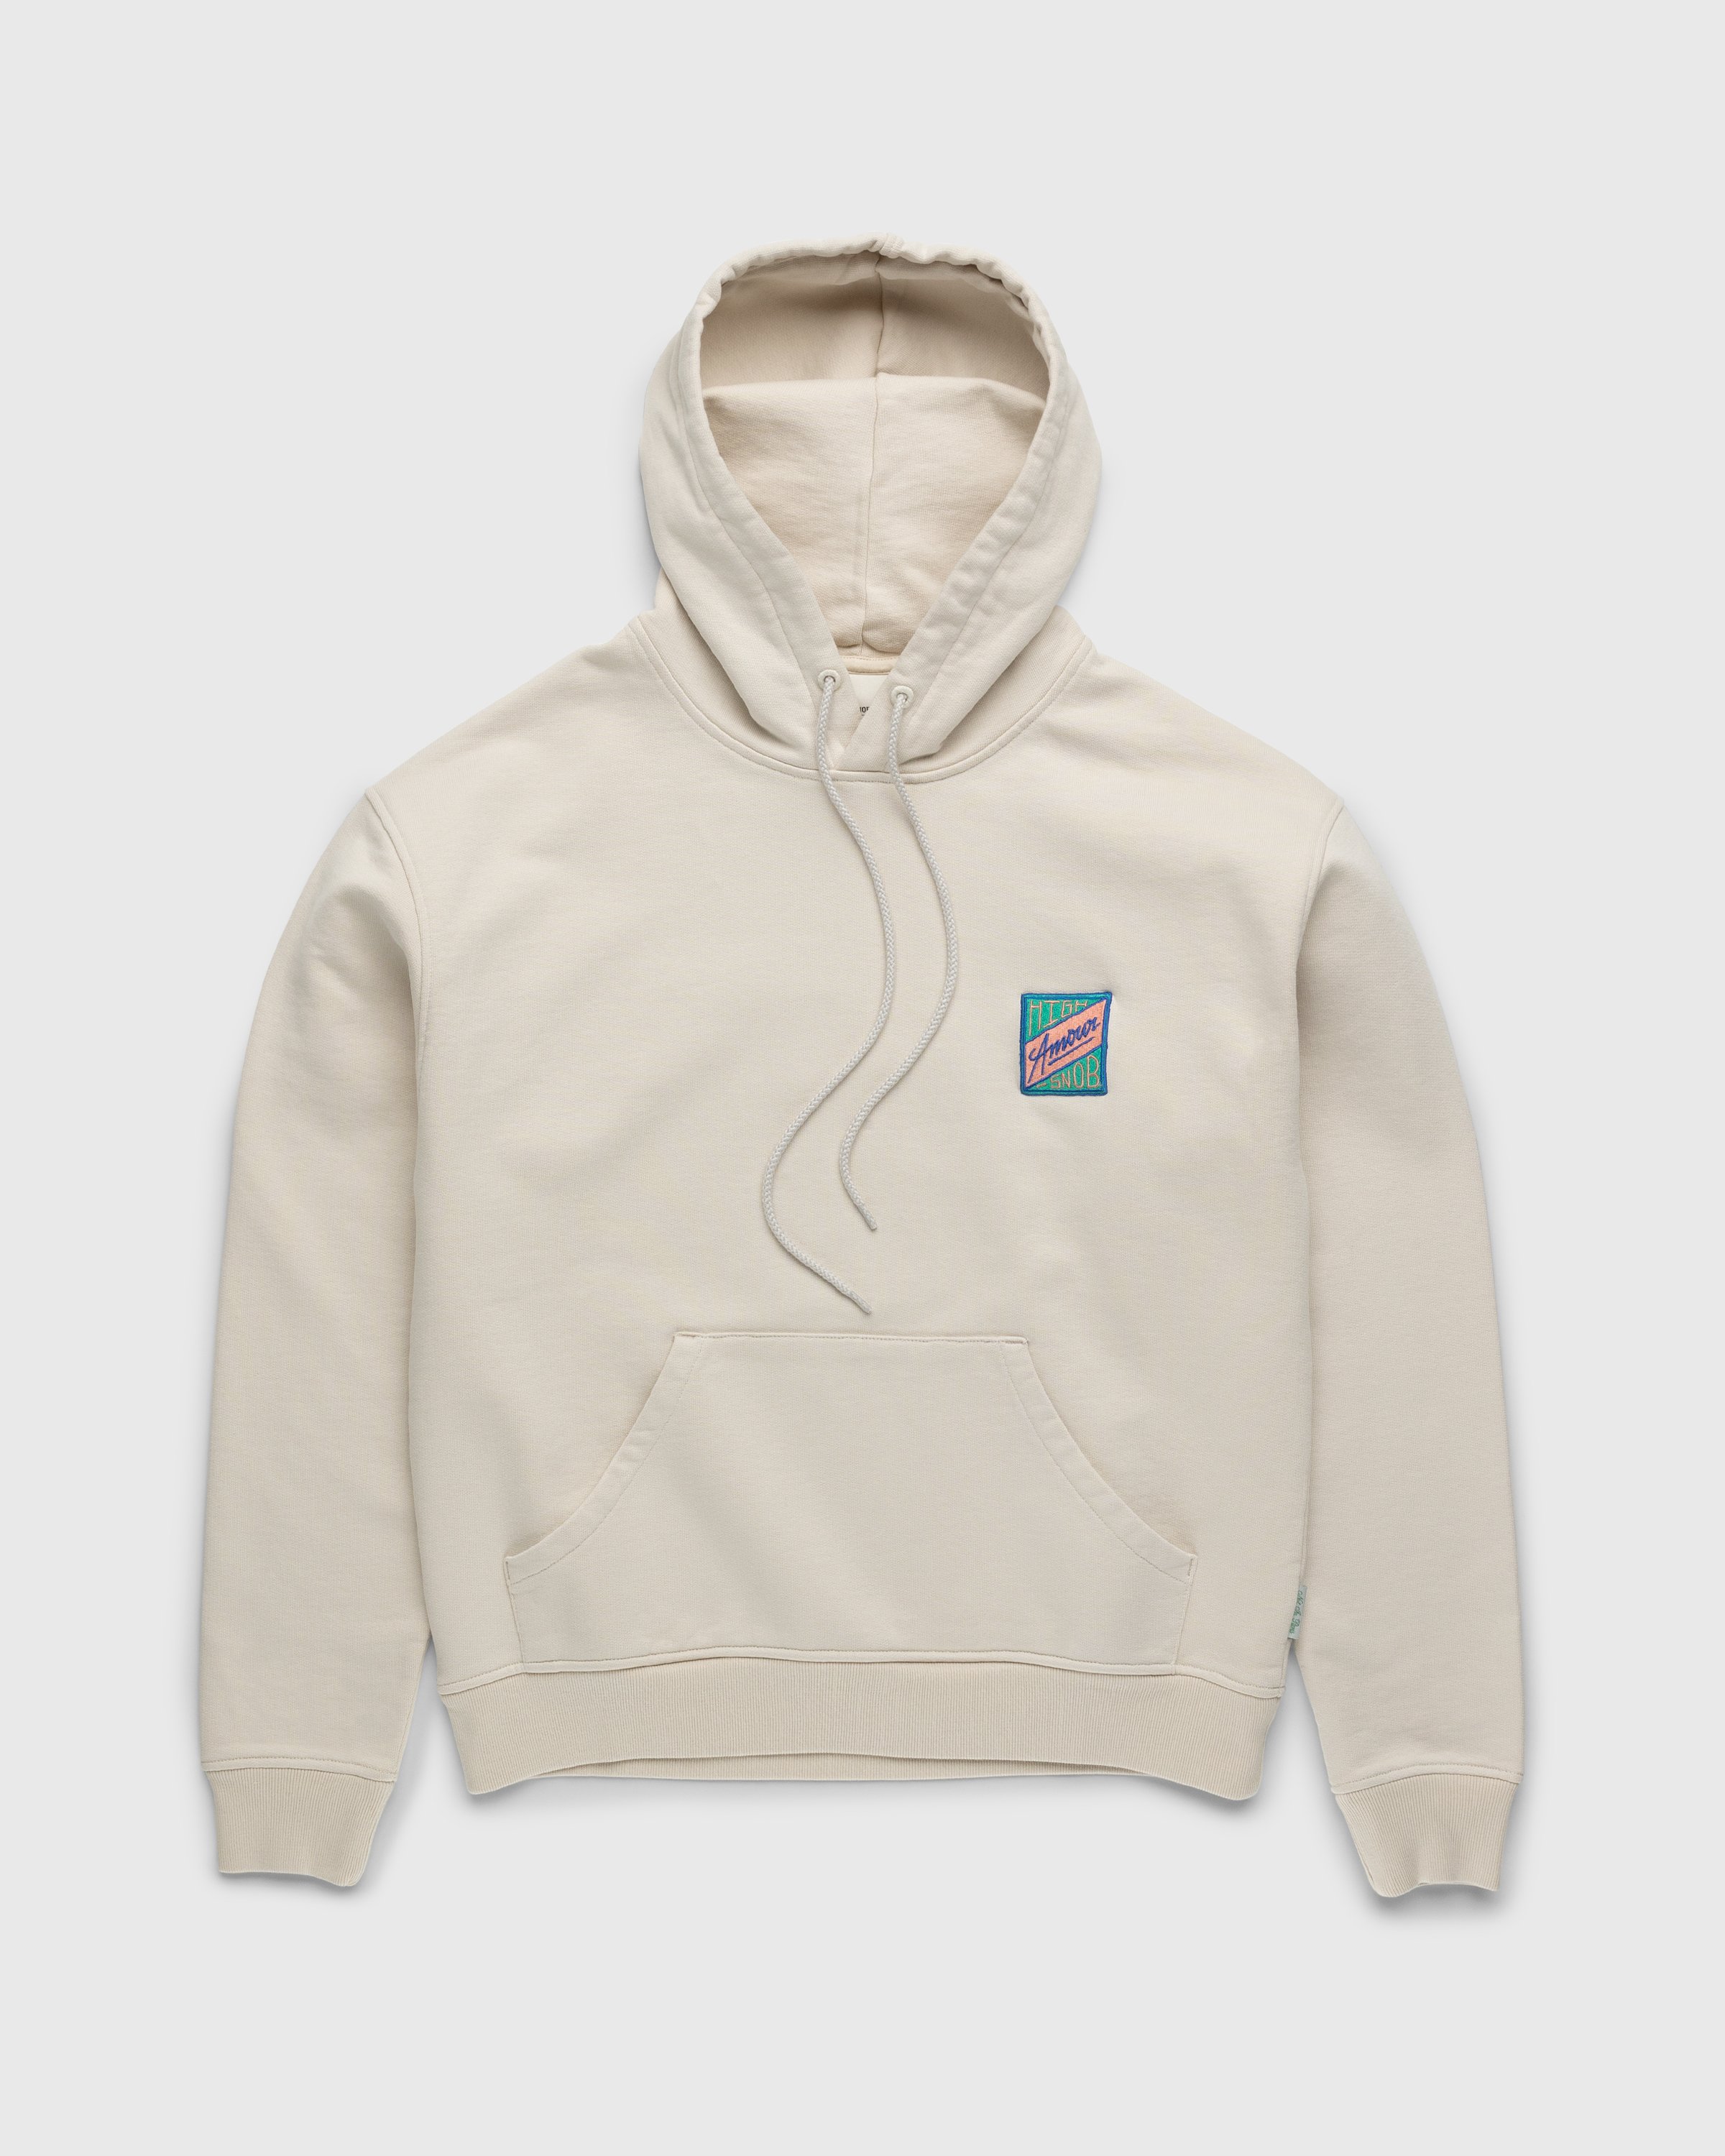 Hotel Amour x Highsnobiety - Not In Paris 4 Hoodie Eggshell - Clothing - Beige - Image 2